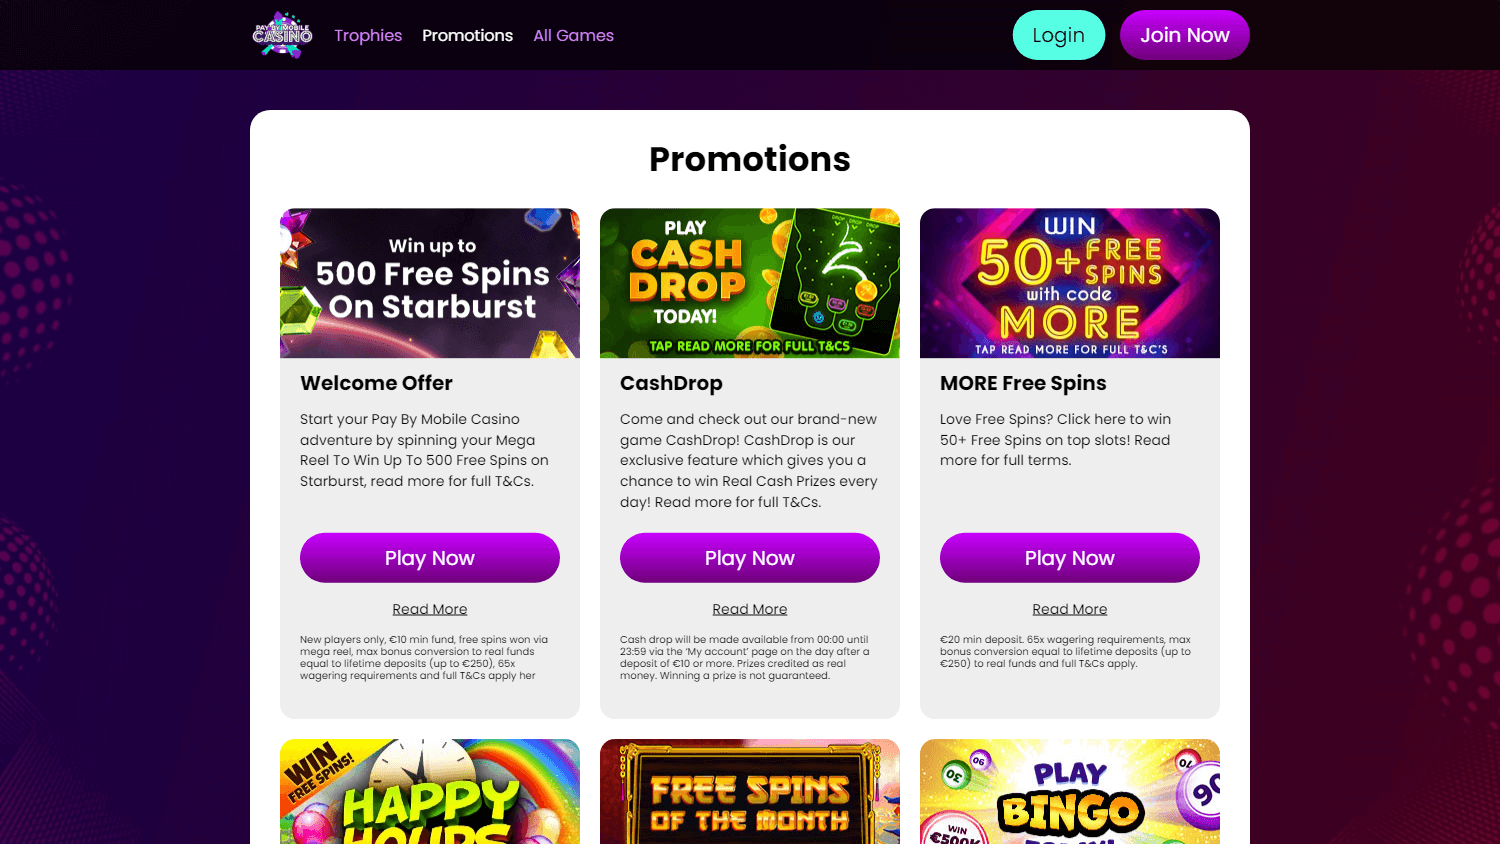 pay_by_mobile_casino_ie_promotions_desktop